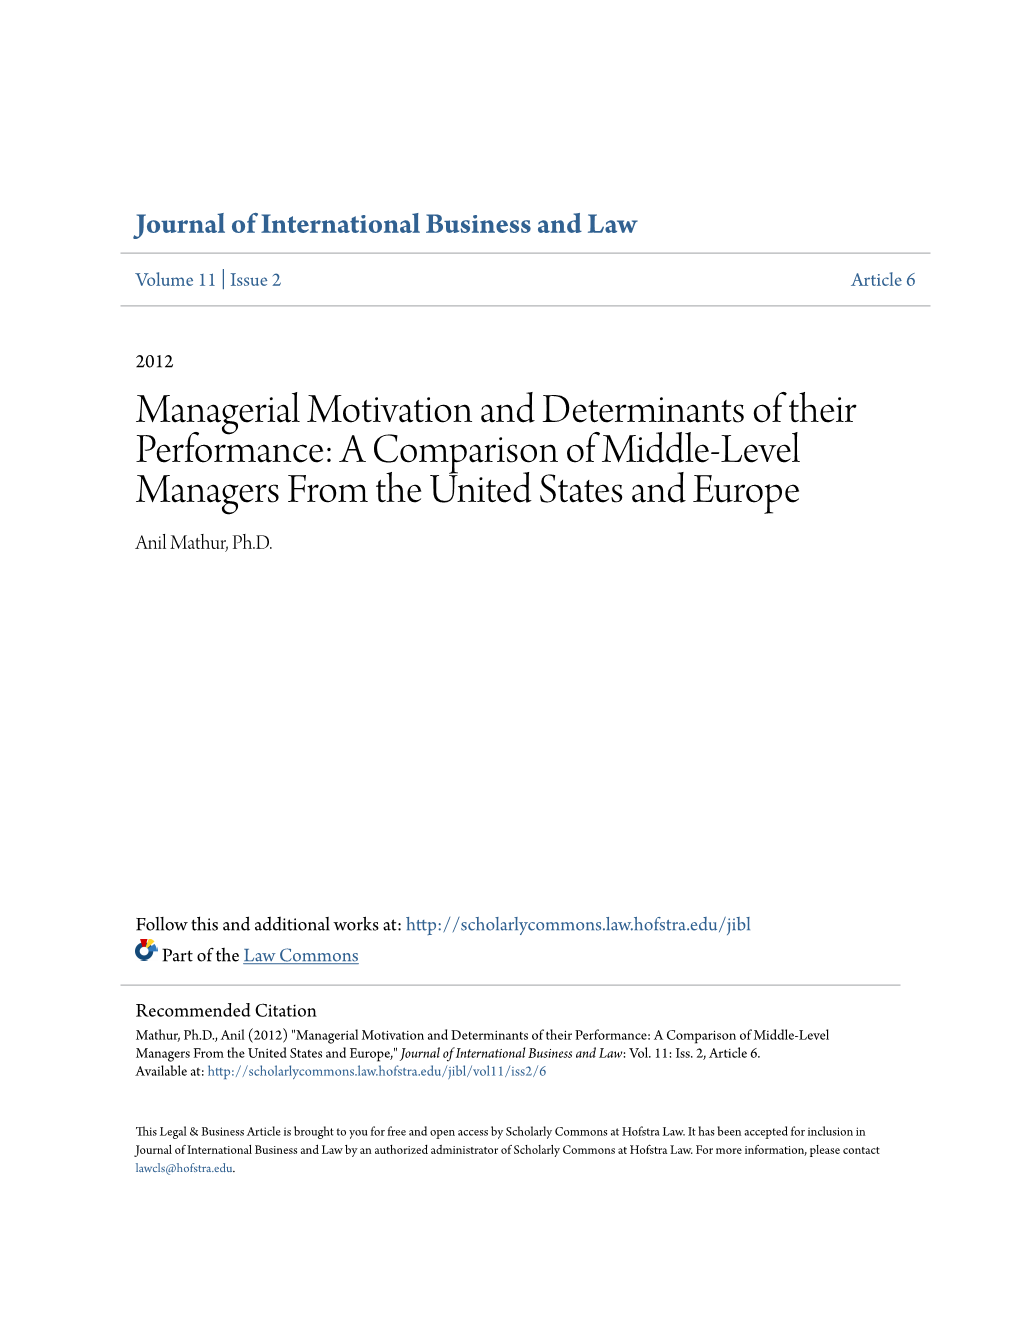 Managerial Motivation and Determinants of Their Performance: a Comparison of Middle-Level Managers from the United States and Europe Anil Mathur, Ph.D